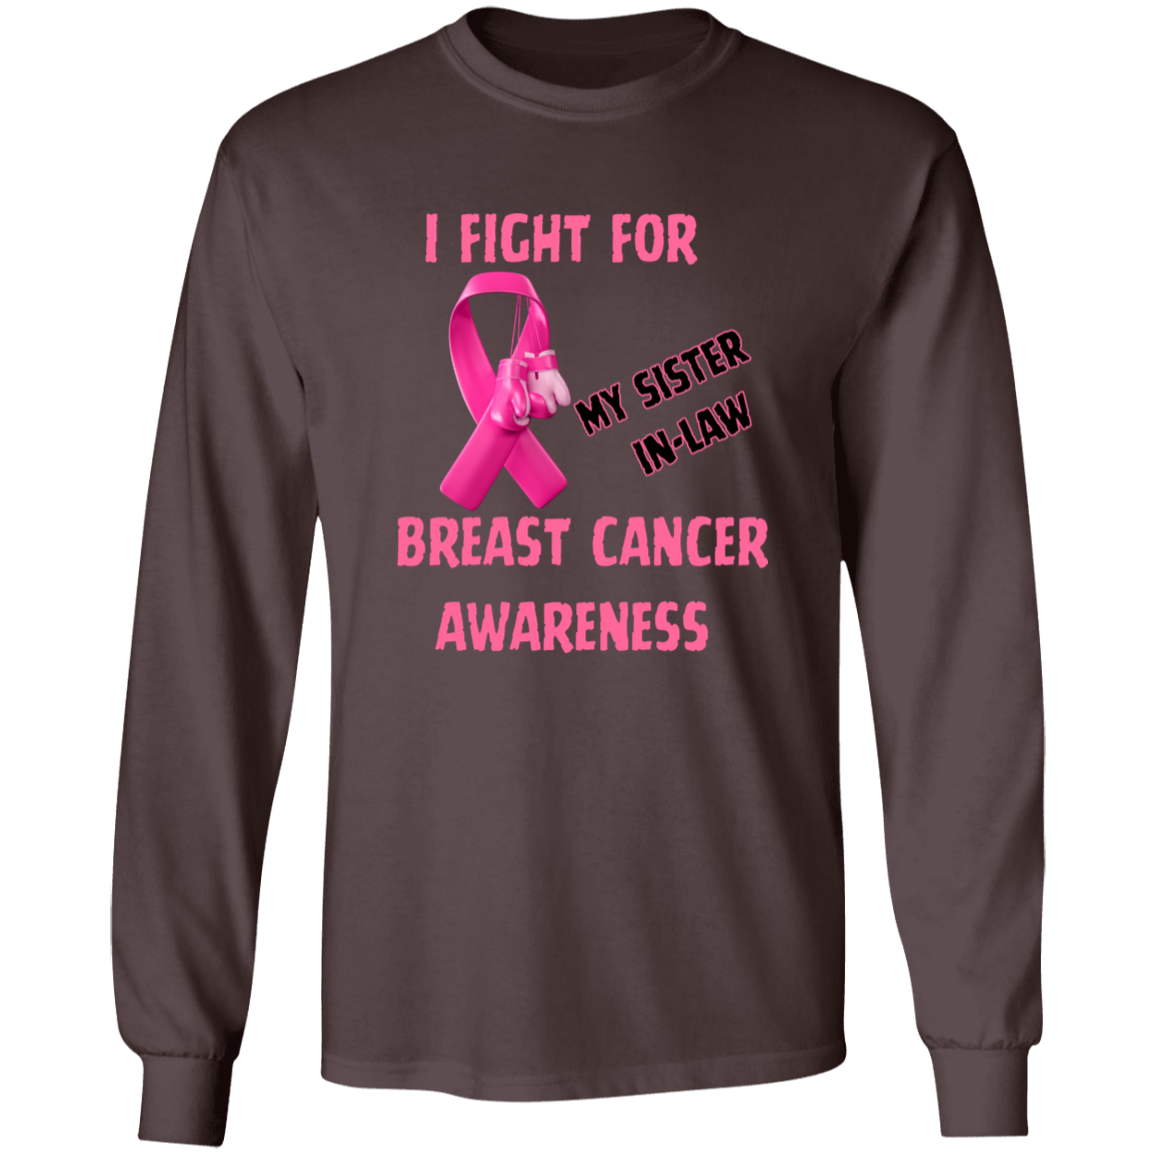 I Fight For Sister in Law Long Sleeve Shirt